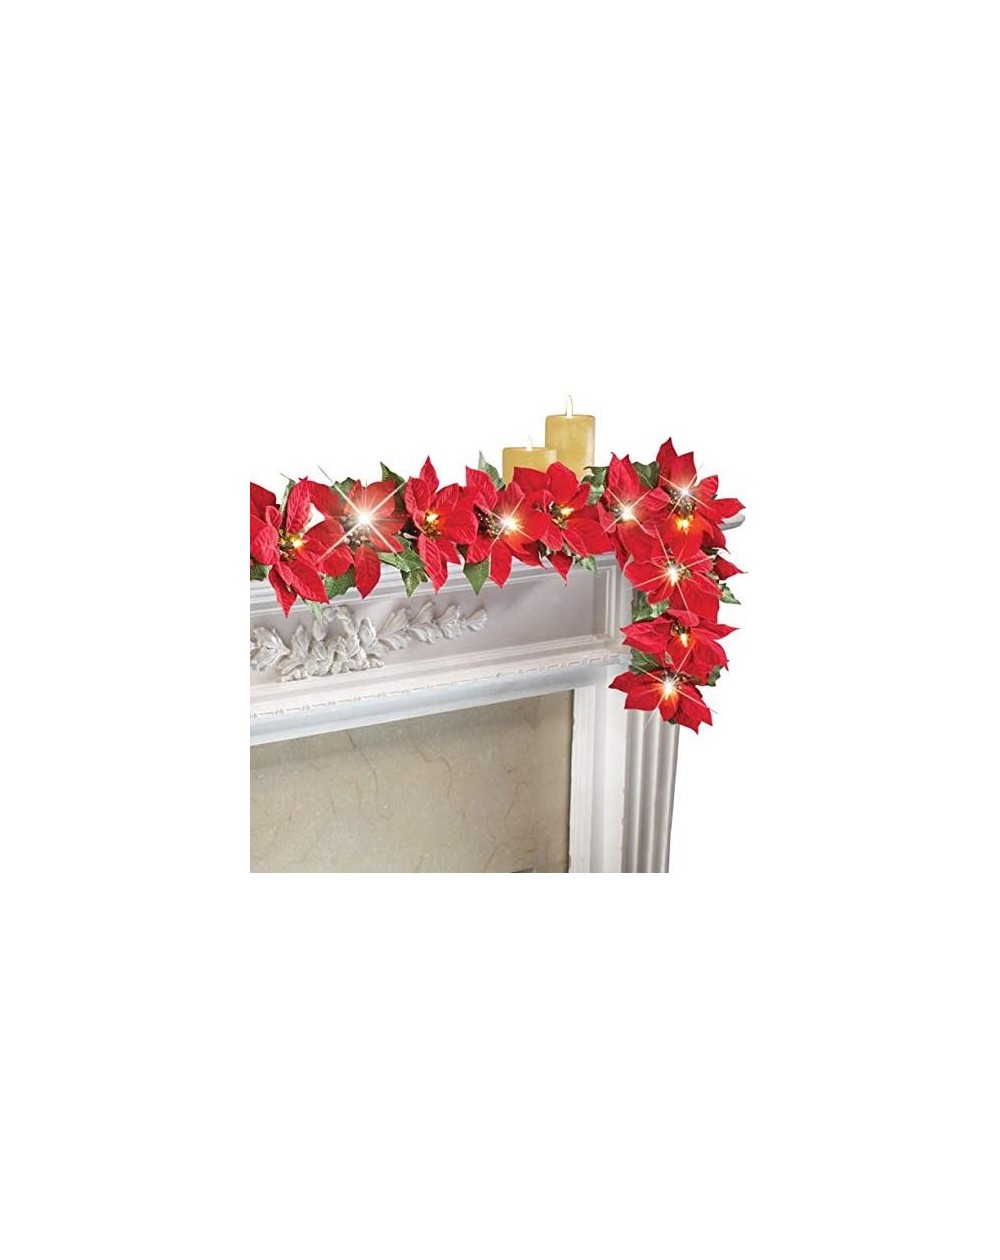 Garlands JH Smith Co Cordless Lighted Poinsettia Garland-Red - Red - CX11176IV9Z $16.56